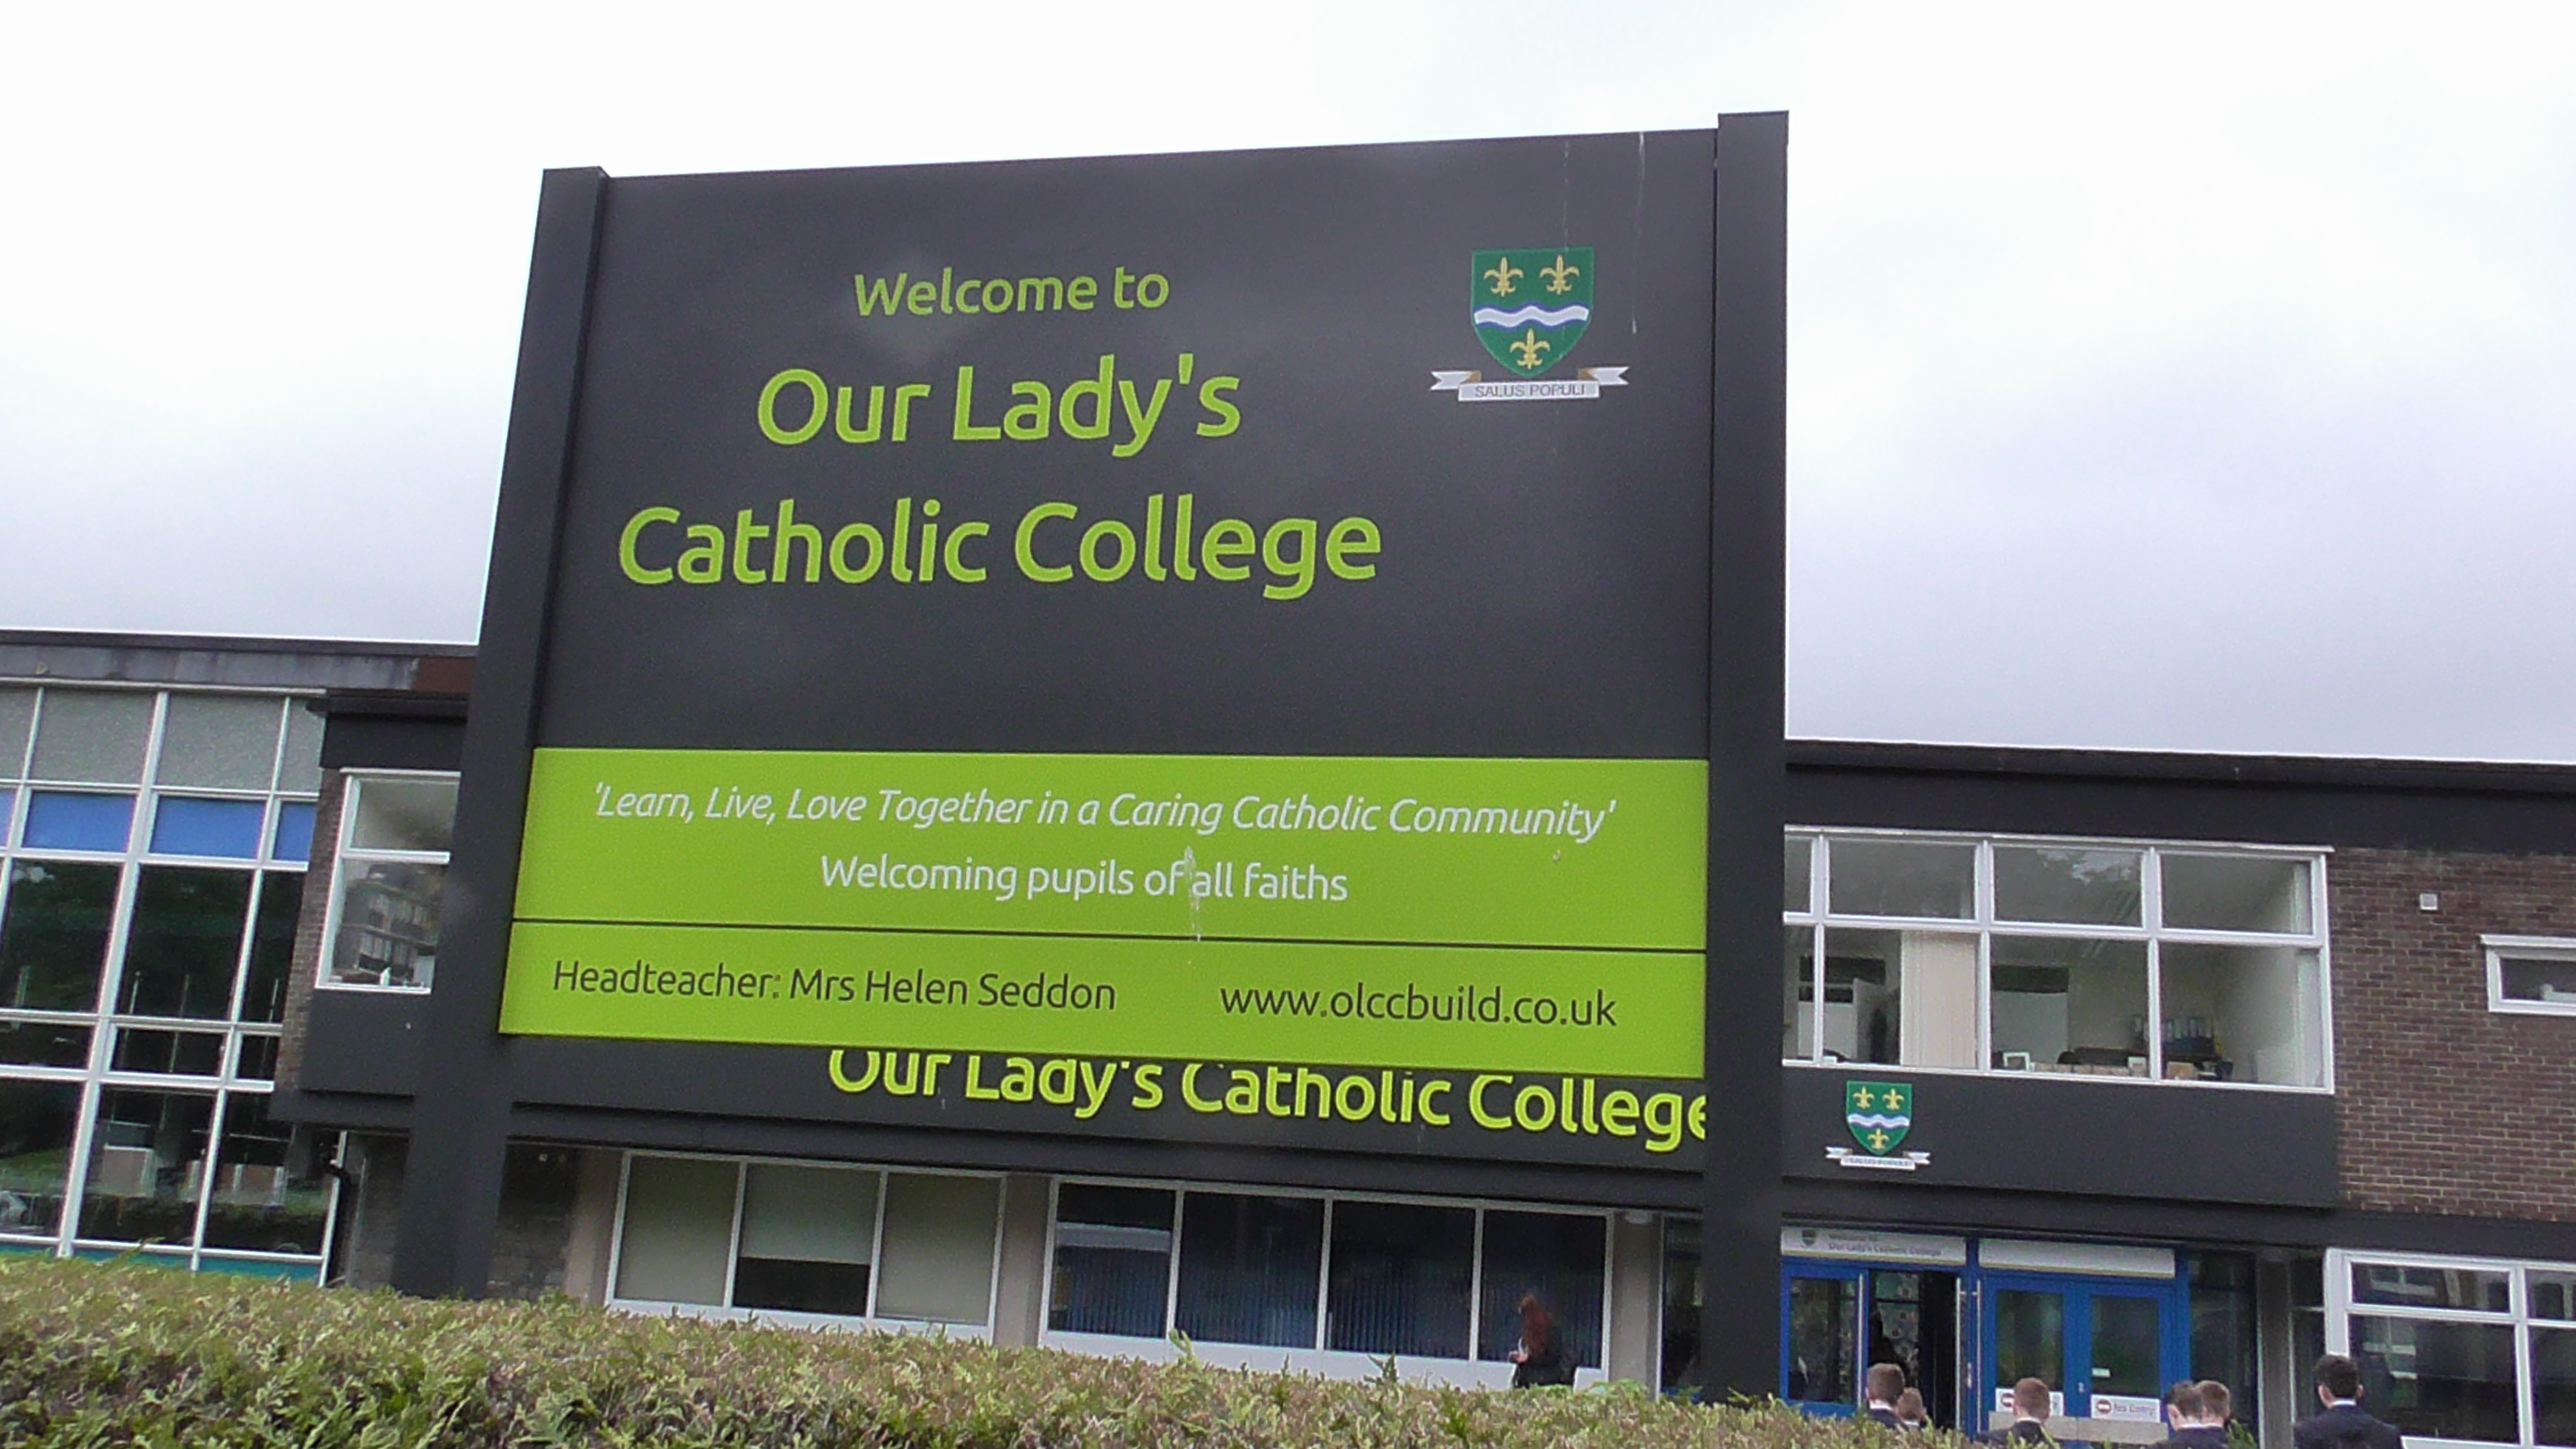 Ableton Live case study photo: Our Lady's Catholic College